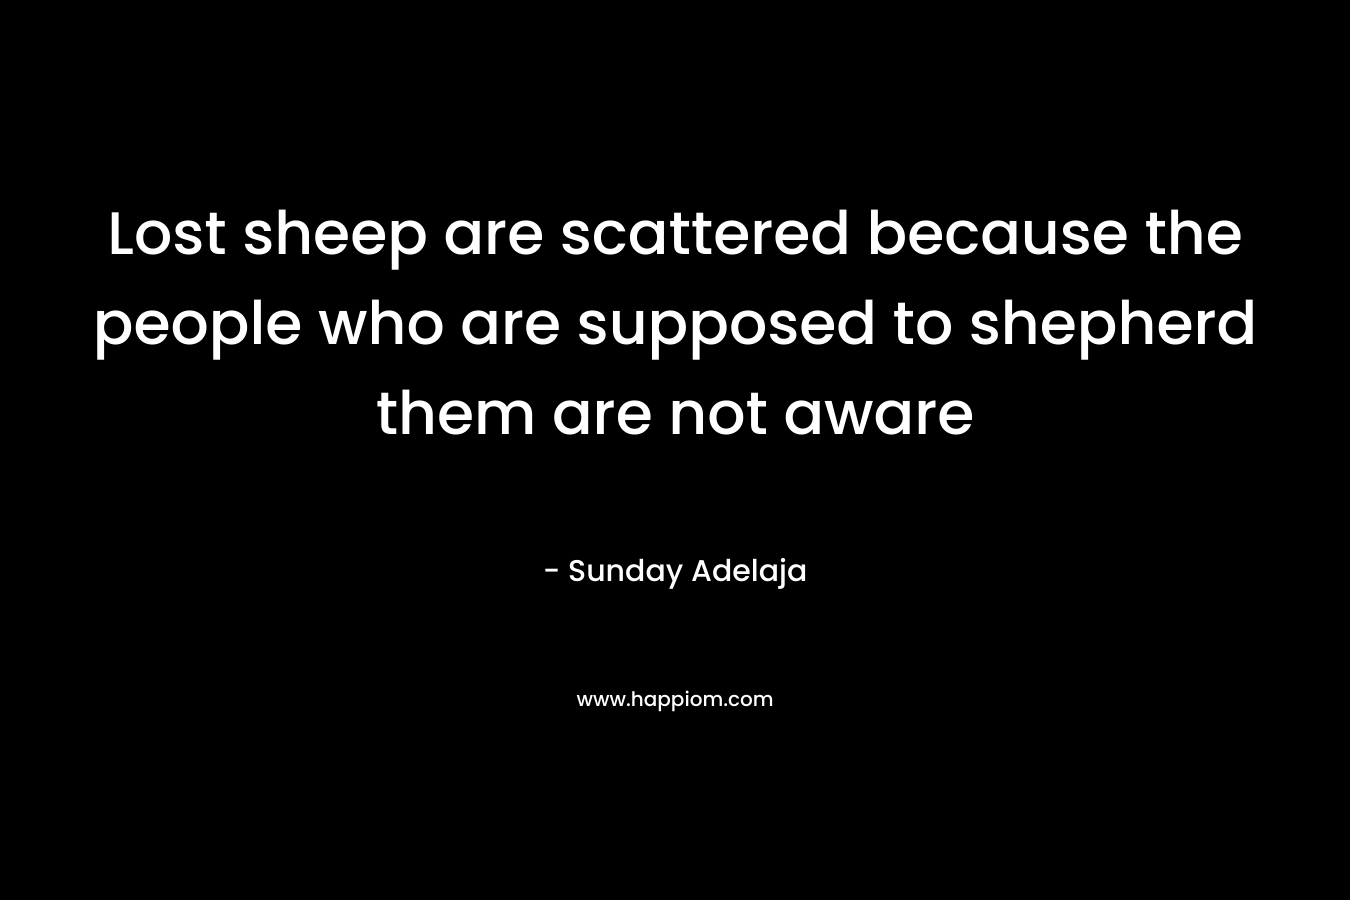 Lost sheep are scattered because the people who are supposed to shepherd them are not aware